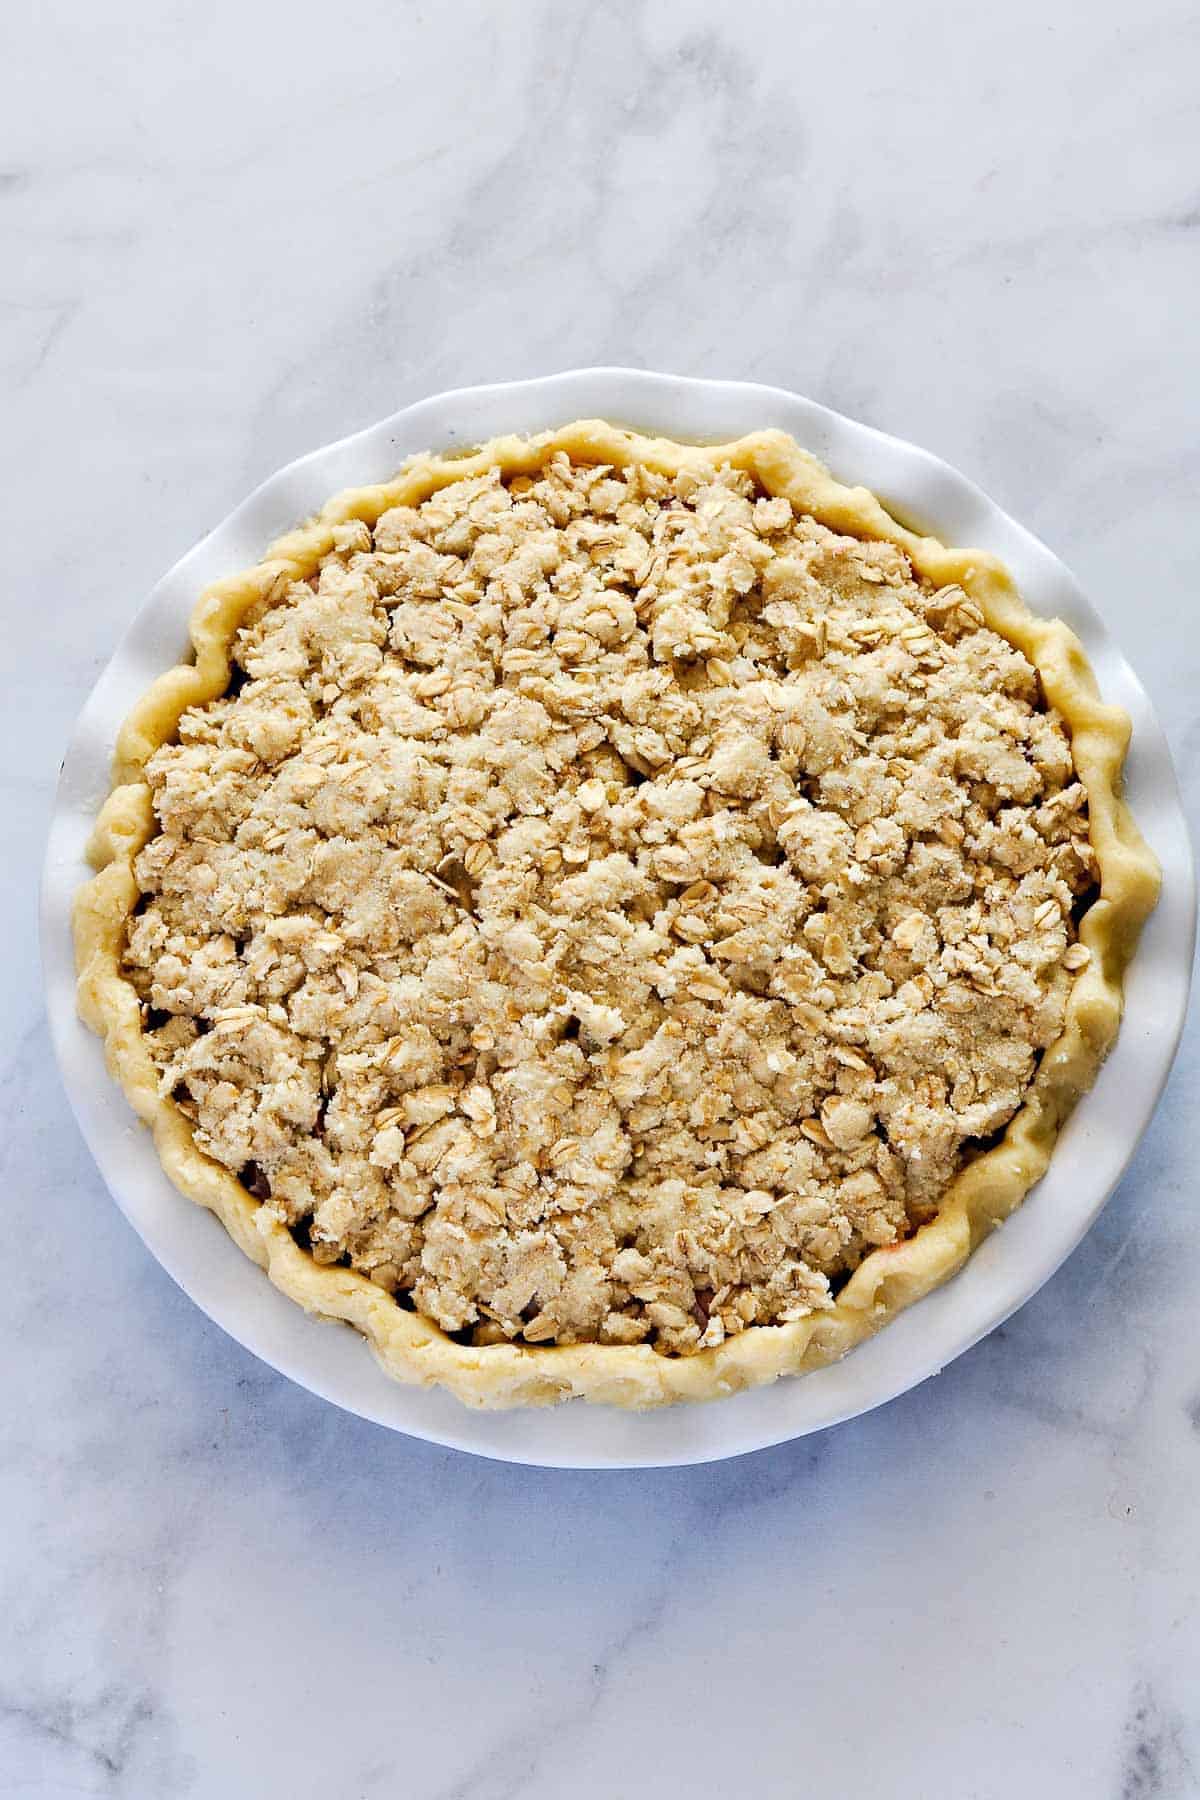 Adding oatmeal crumb topping to Strawberry Rhubarb Crumble Pie.